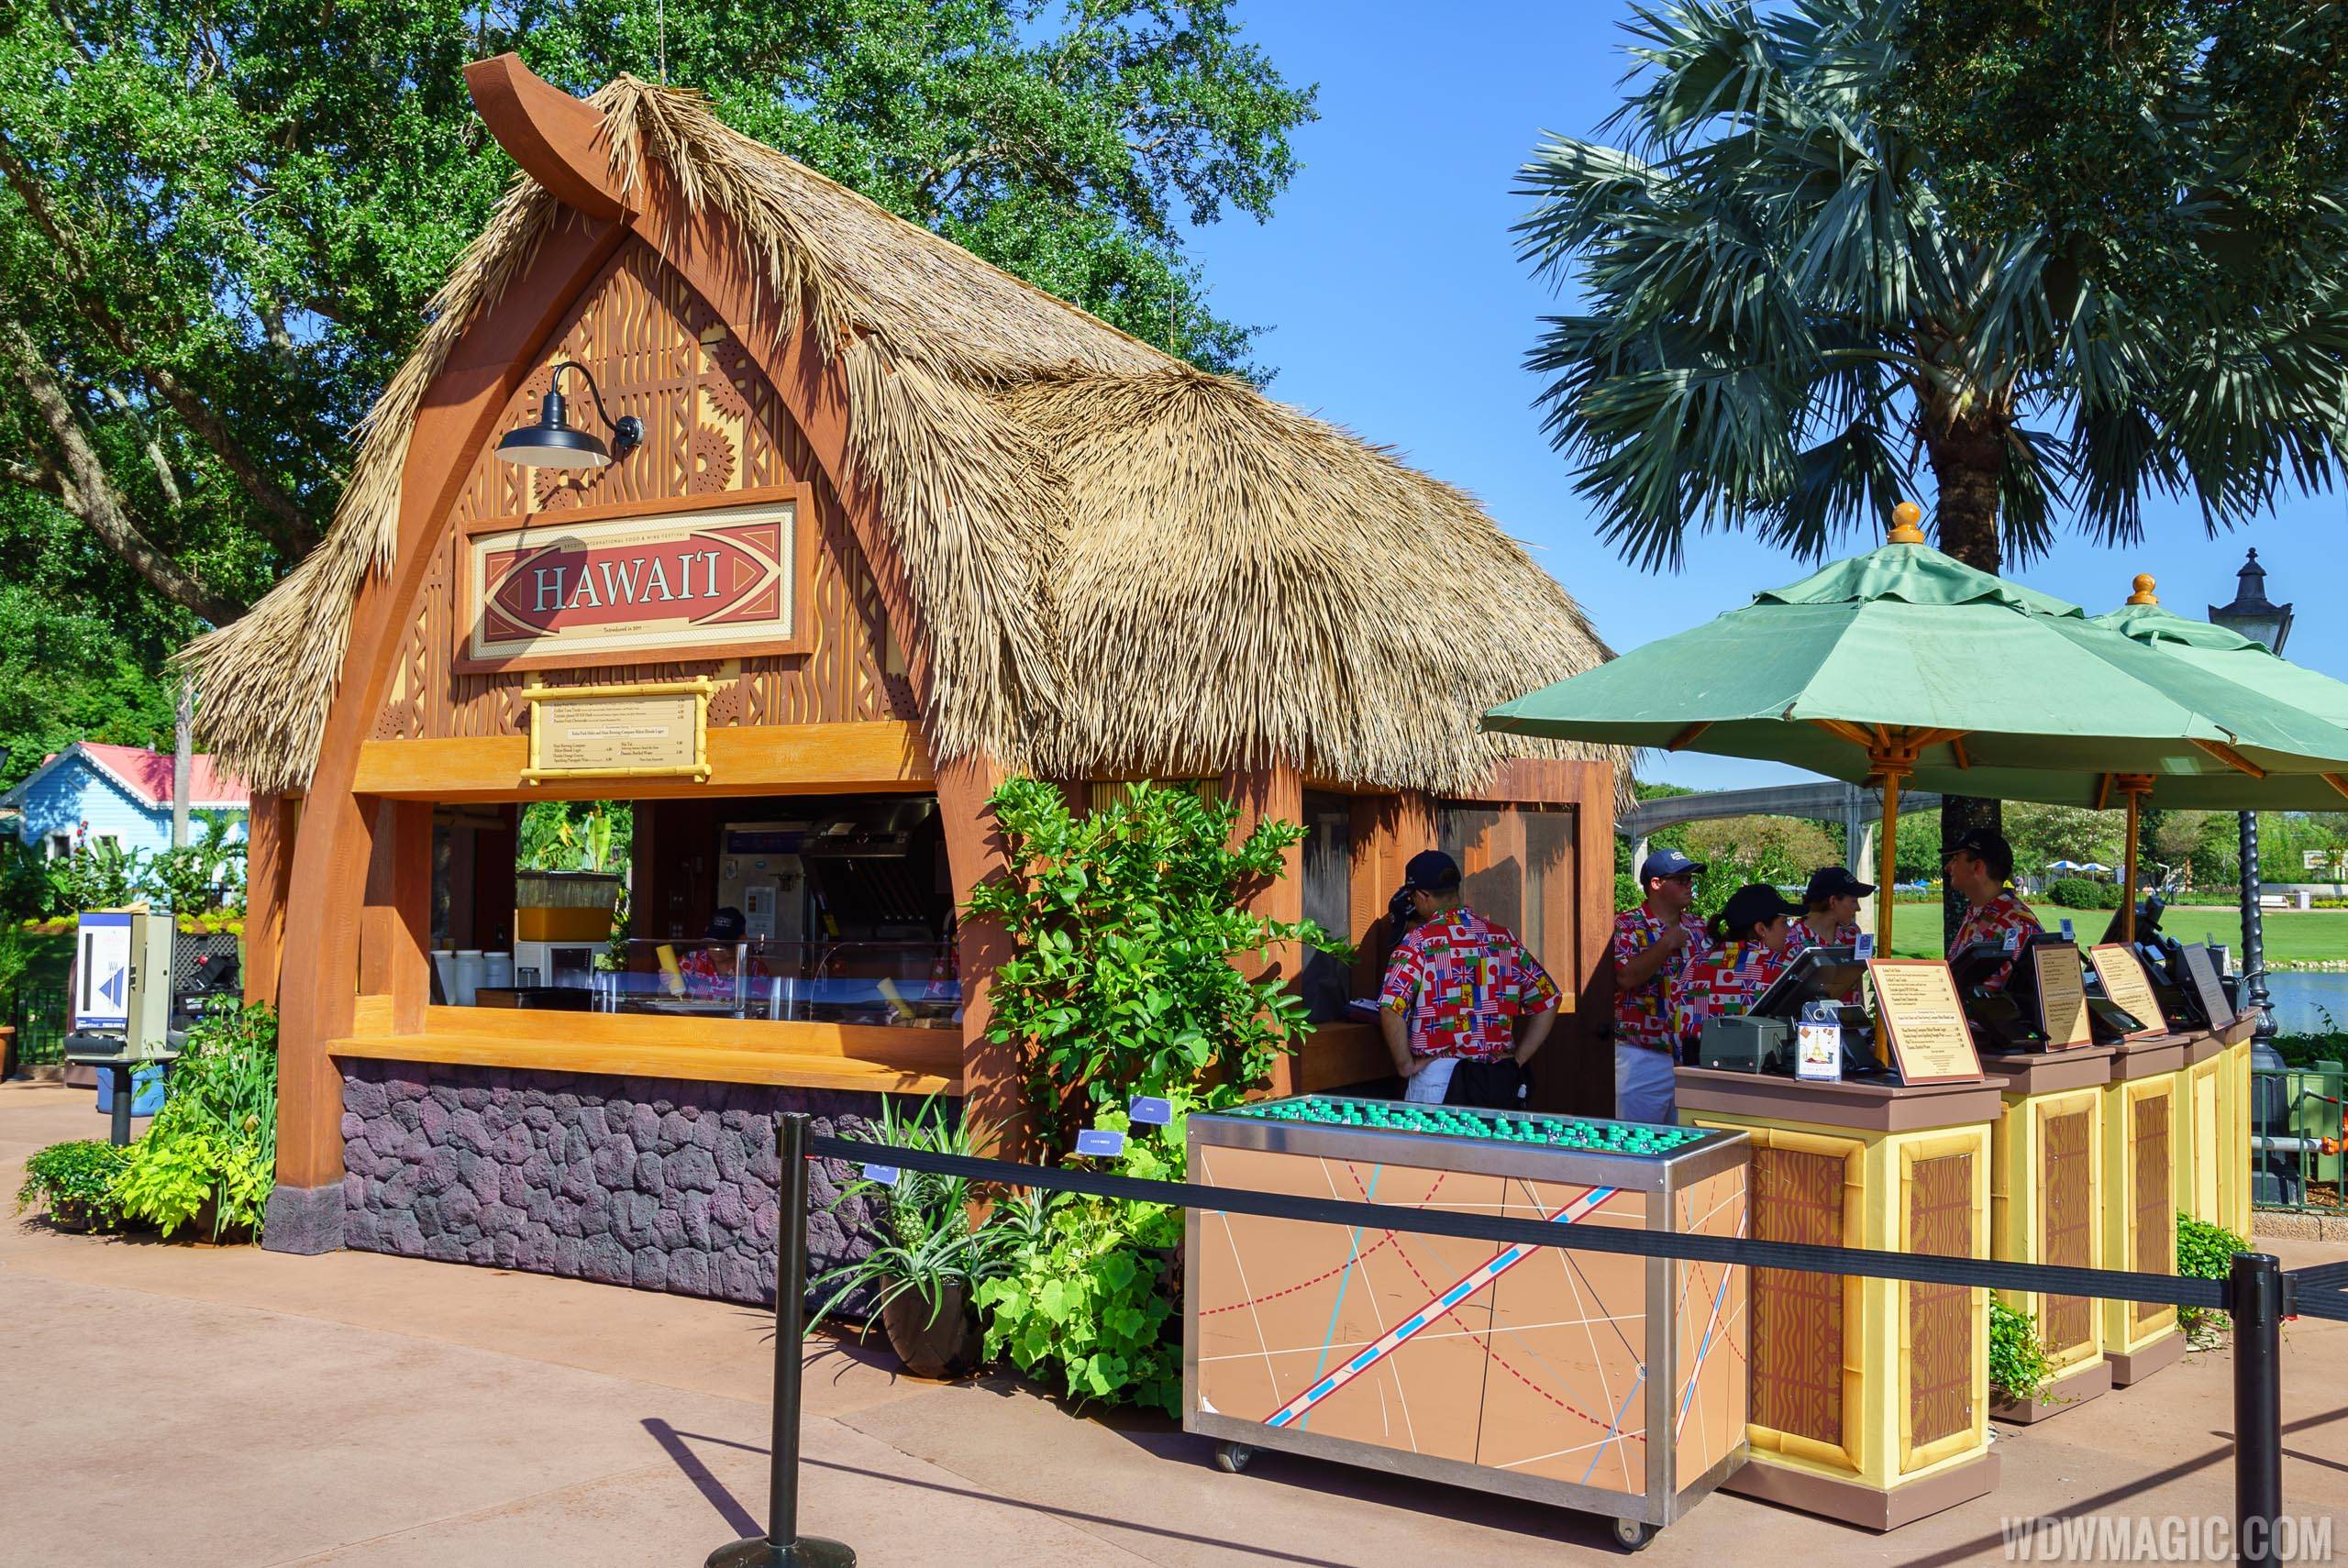 2017 Epcot Food and Wine Festival Marketplace kiosks, menus and pricing